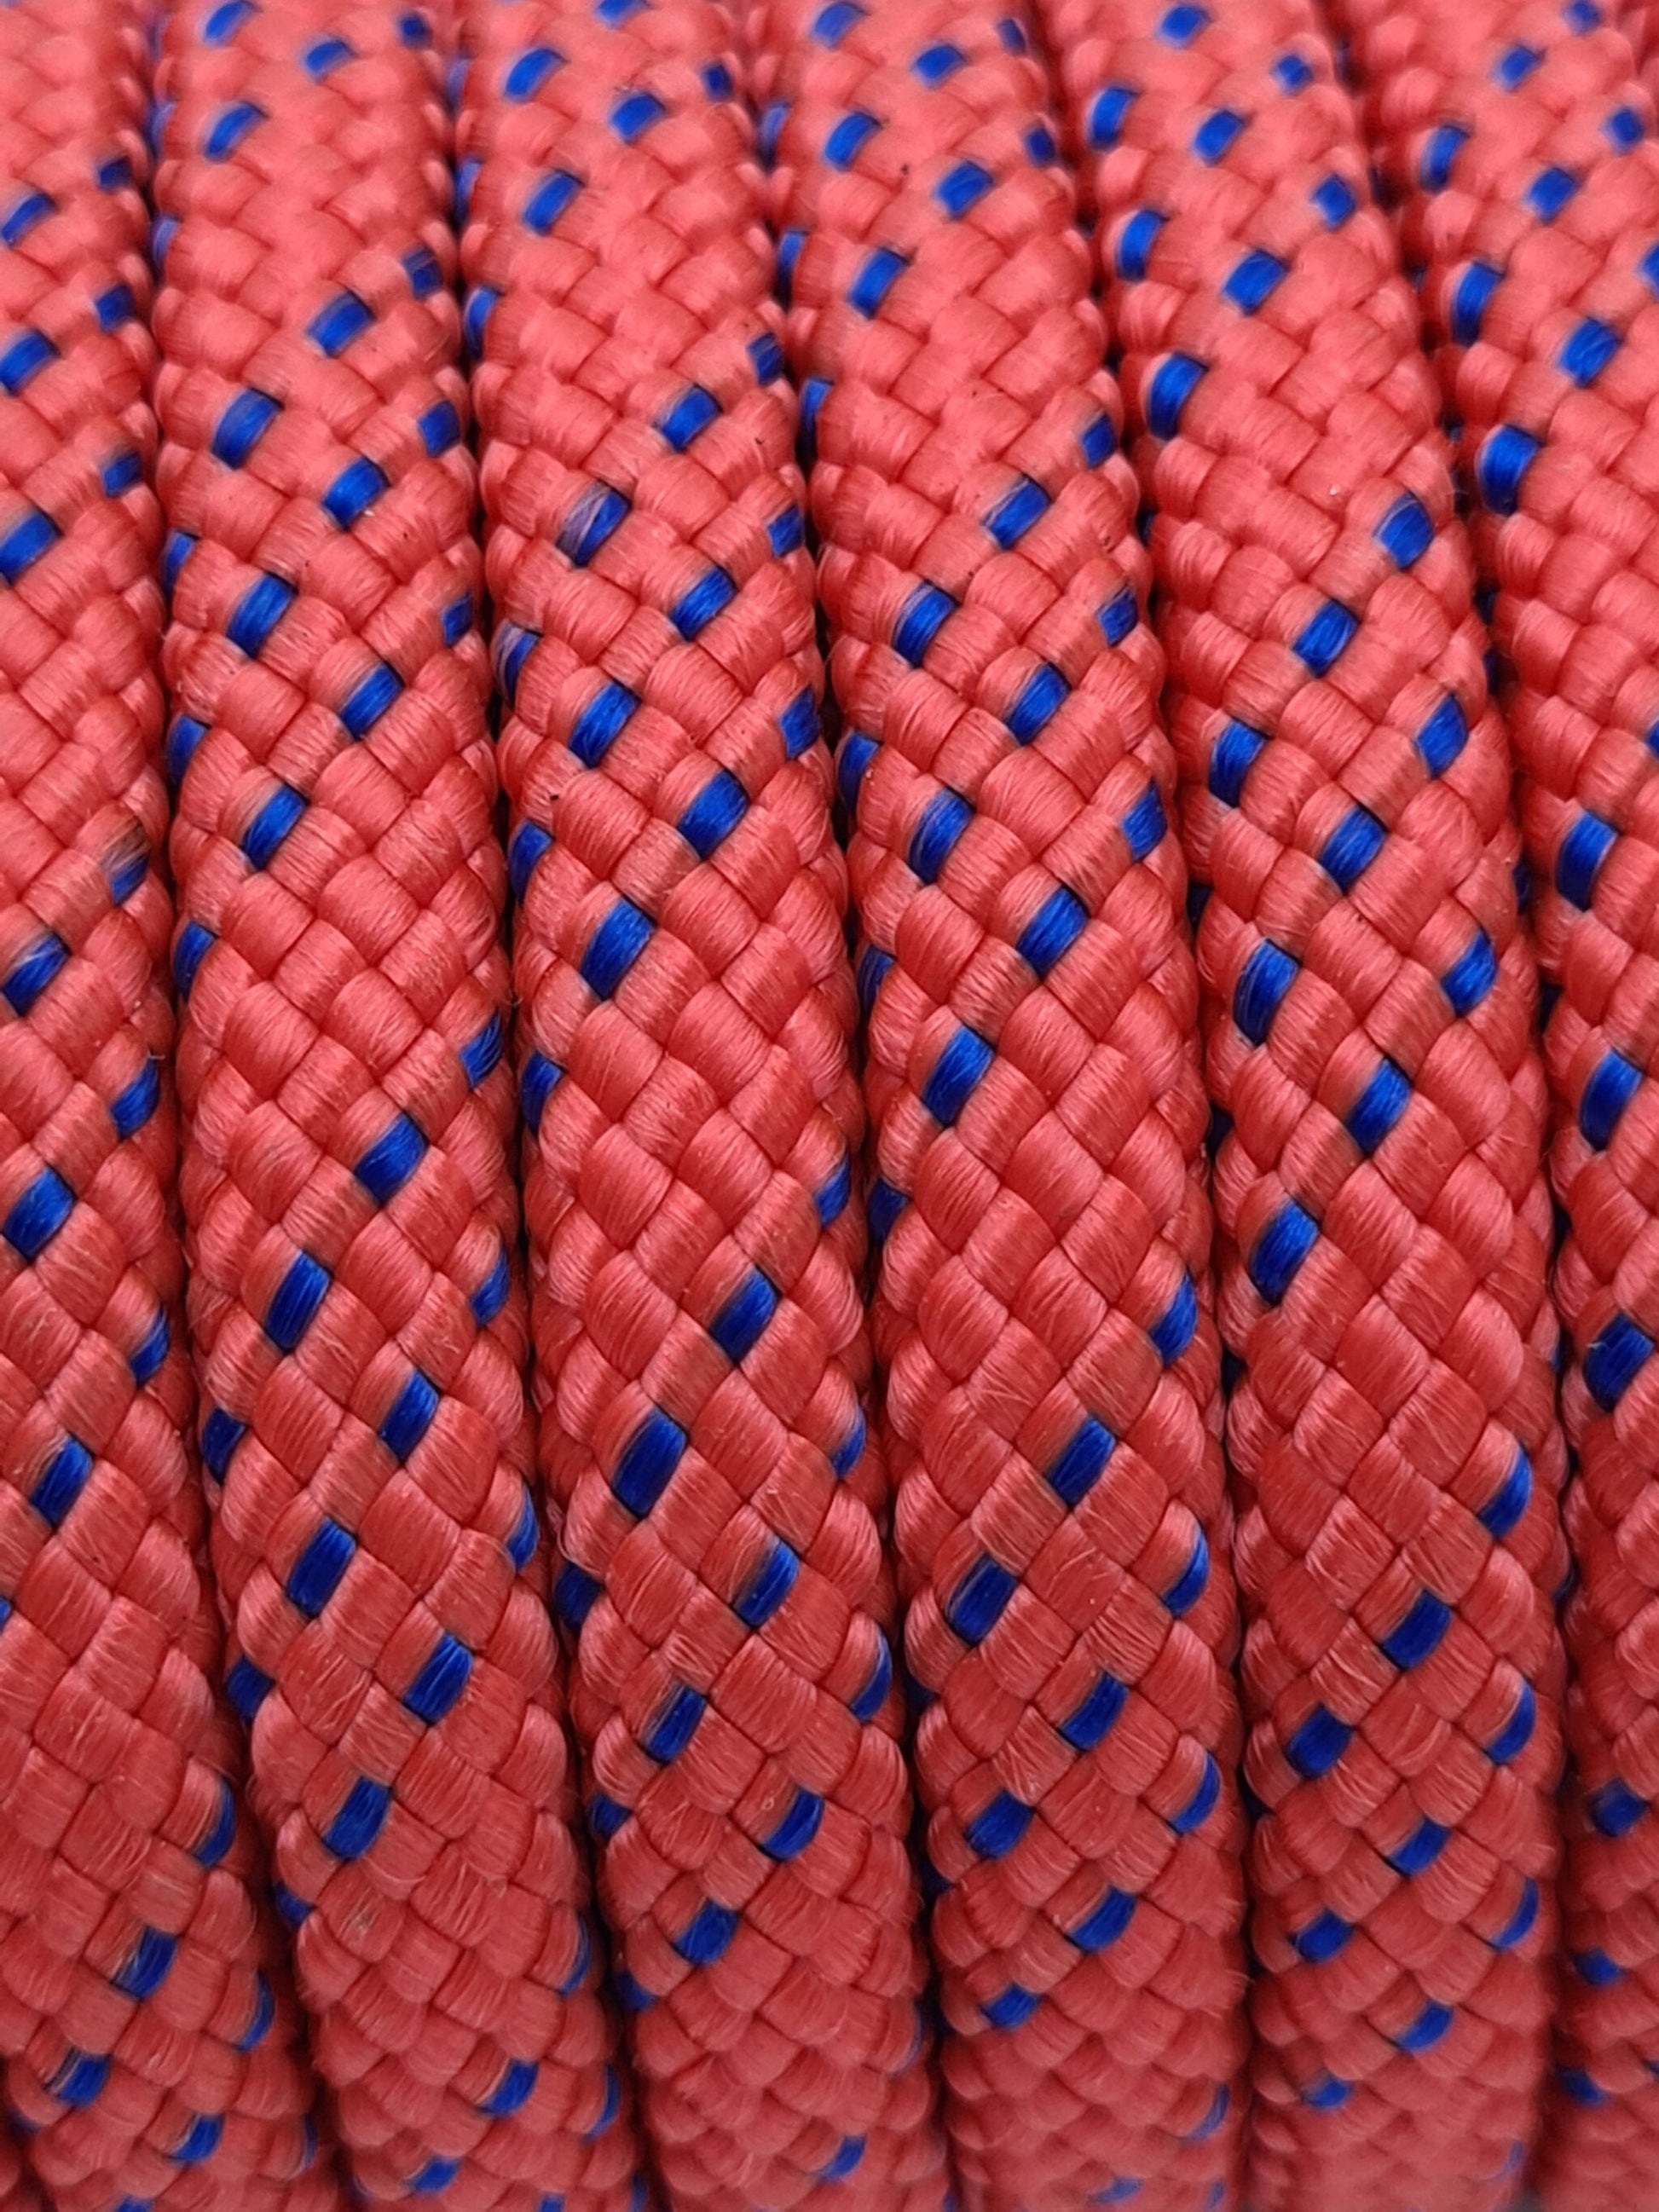 8mm Rope for Magnet Fishing - Close up